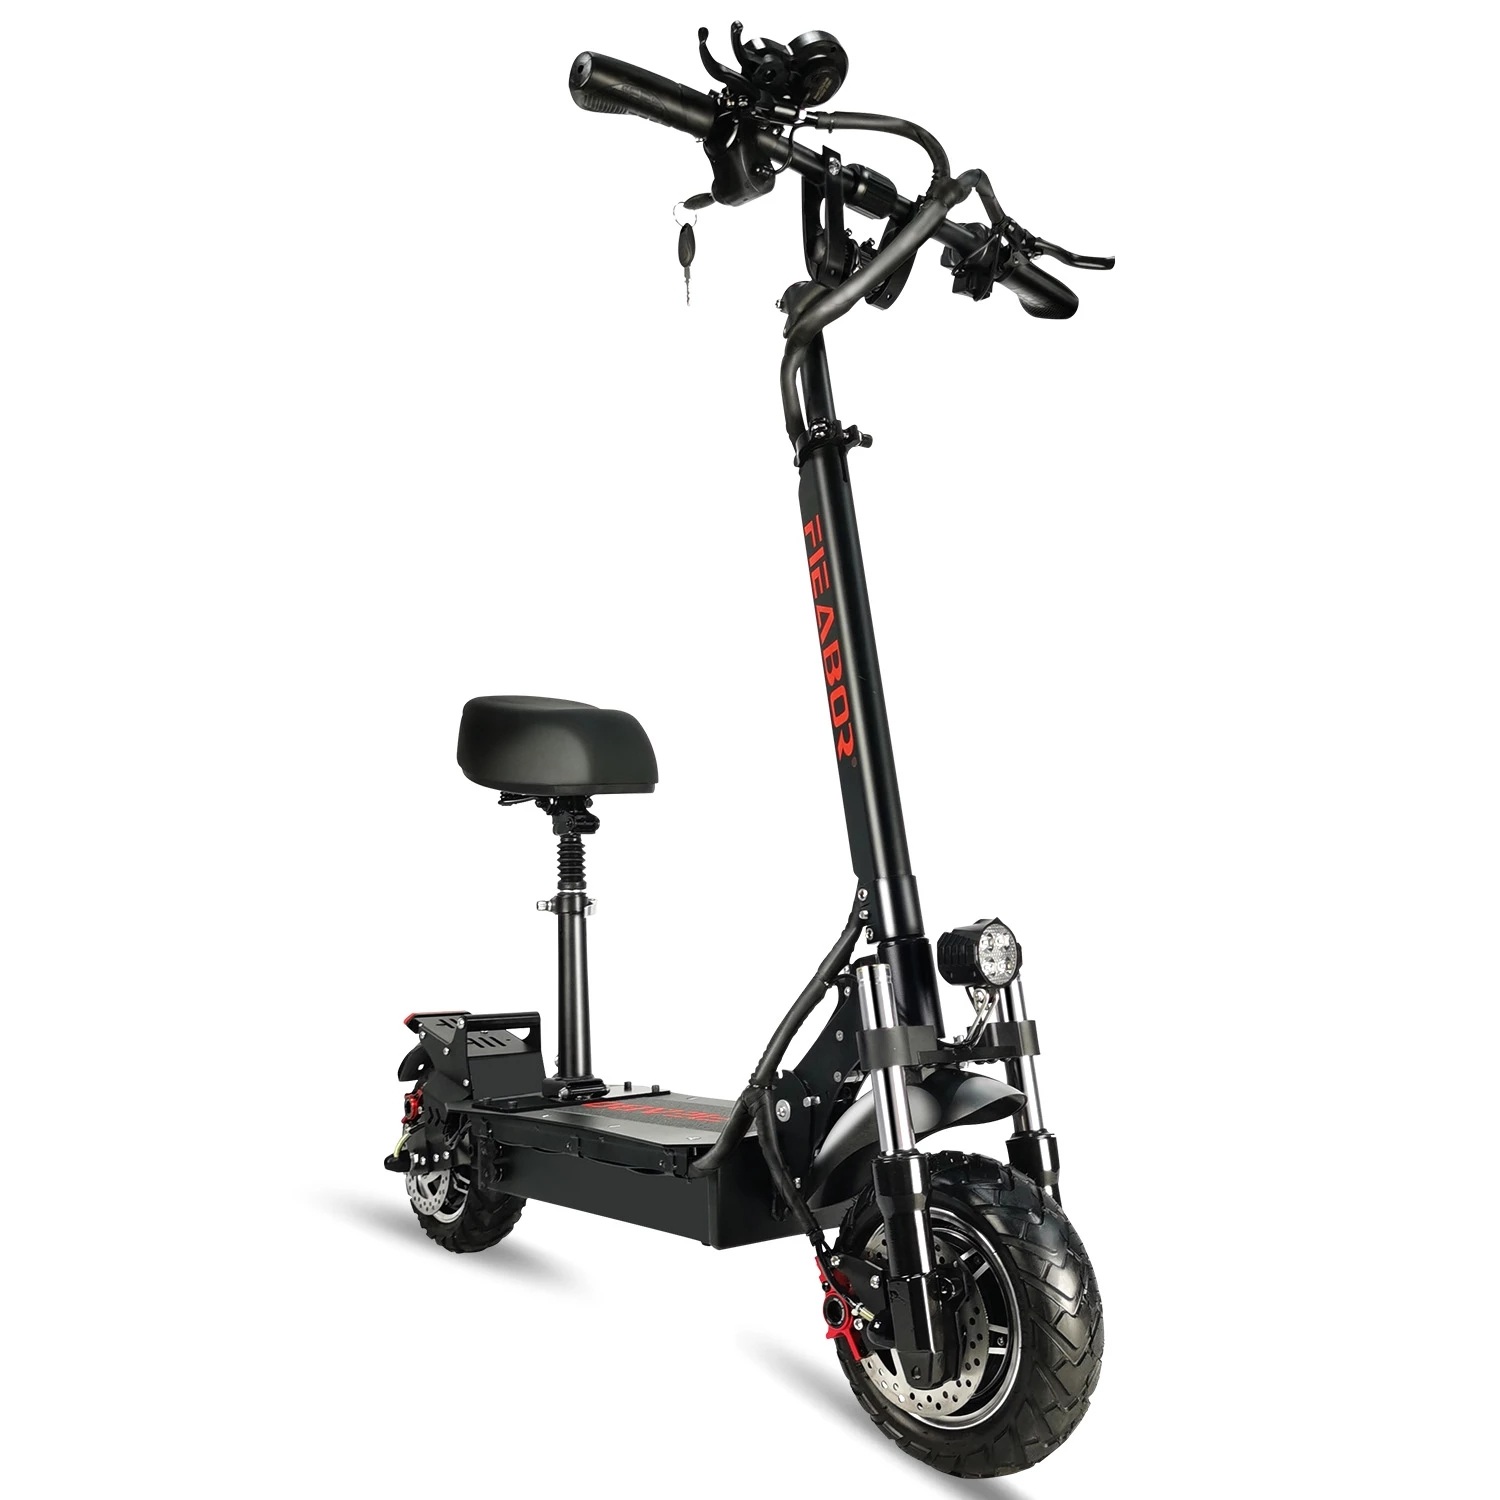 Find US DIRECT FIEABOR Q08P Oil Brake 2400W 60V 27Ah Dual Motor 10 5 Inch Electric Scooter 200Kg Max Load 60 80Km Range for Sale on Gipsybee.com with cryptocurrencies